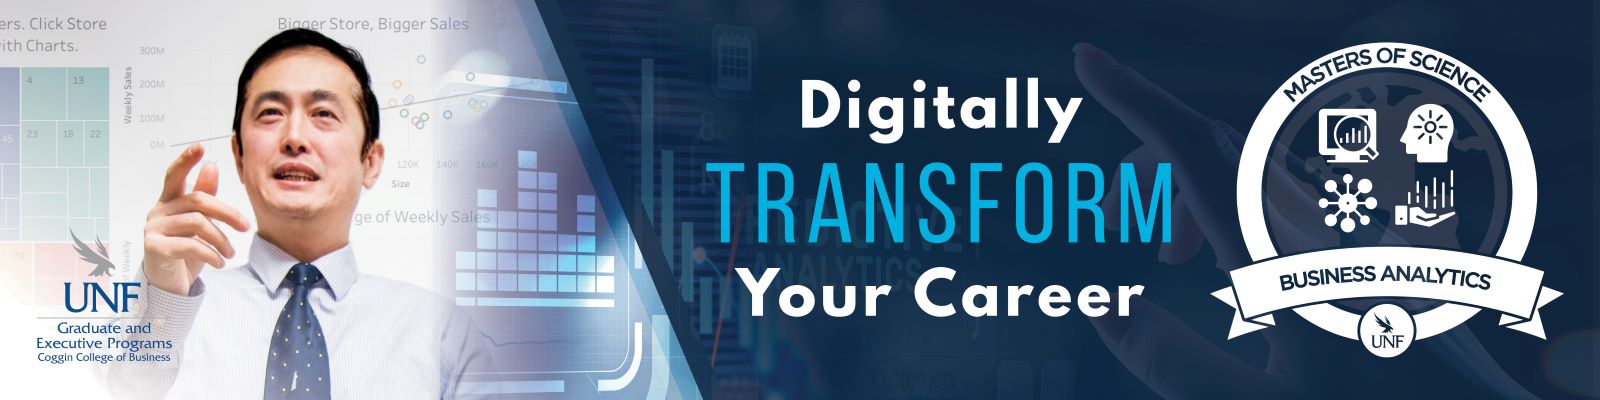 UNF graduate programs Coggin college of business digitally transform your career masters of science business analytics UNF guy pointing and hand